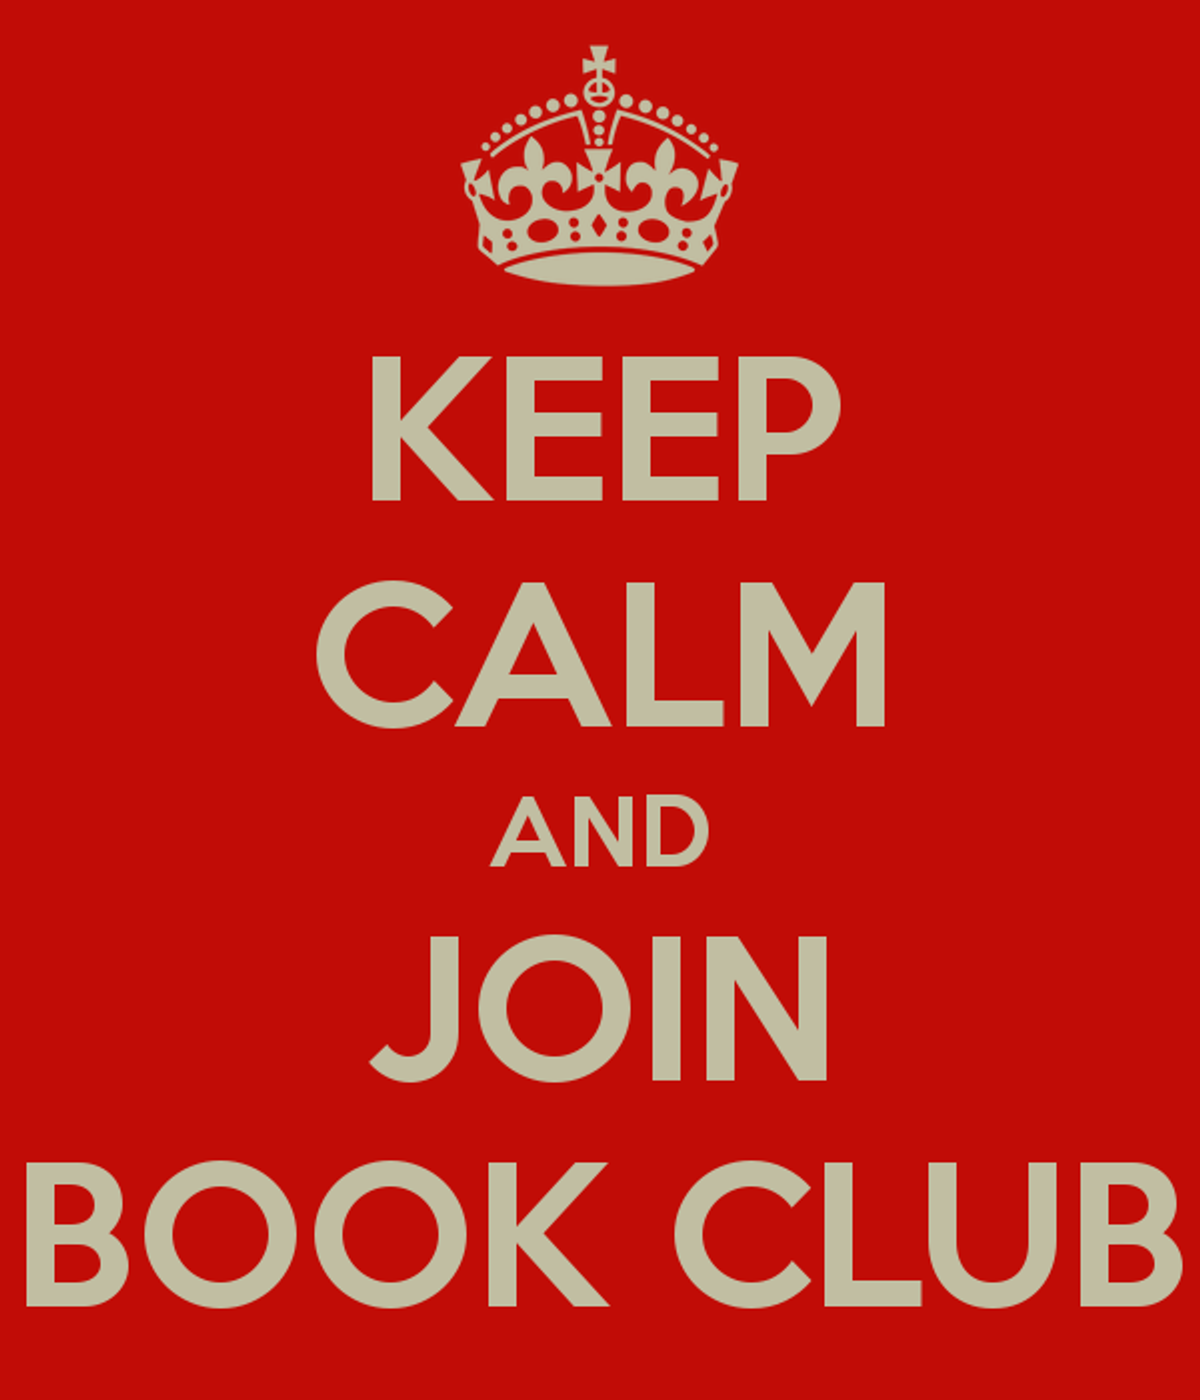 5 Reasons To Join A Book Club